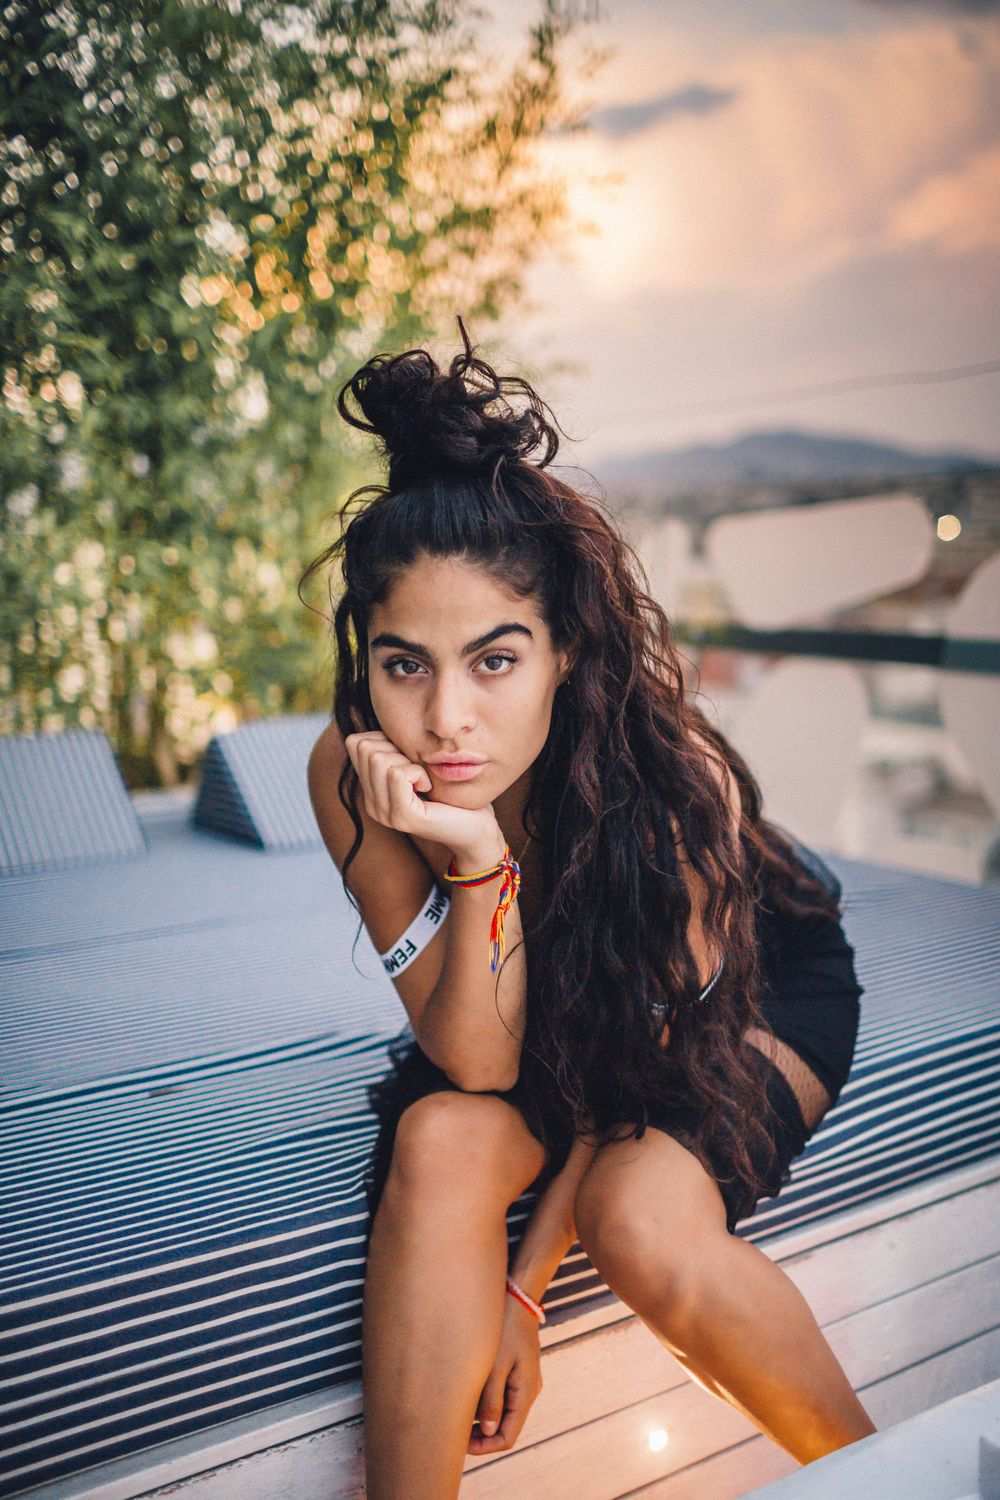 51 Hot Pictures Of Jessie Reyez Will Leave You Flabbergasted By Her Hot Magnificence 19